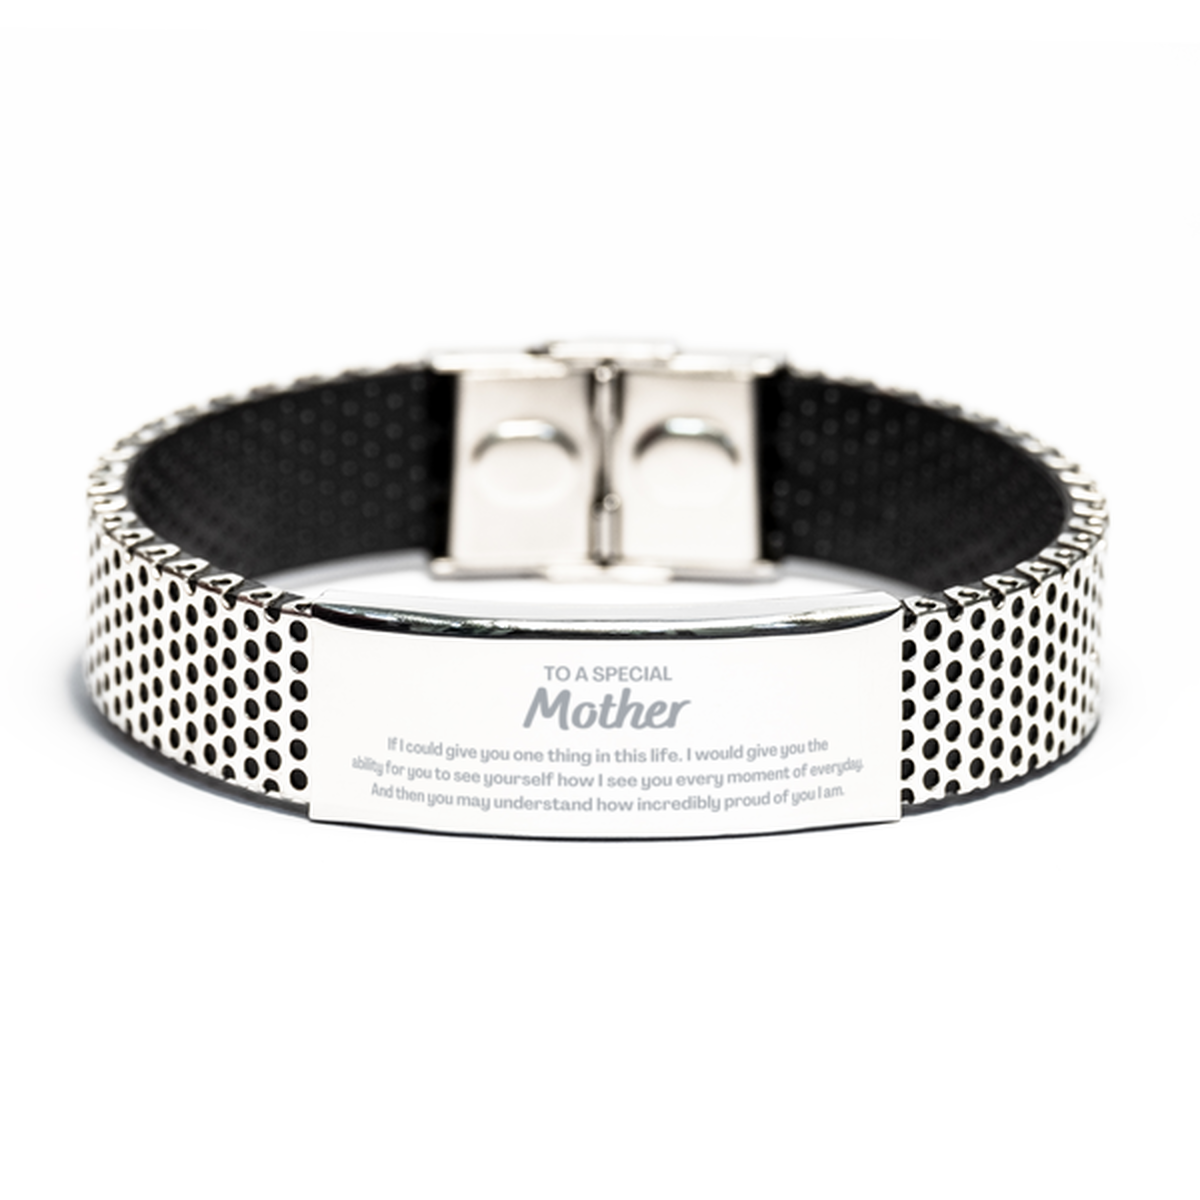 To My Mother Stainless Steel Bracelet, Gifts For Mother Engraved, Inspirational Gifts for Christmas Birthday, Epic Gifts for Mother To A Special Mother how incredibly proud of you I am